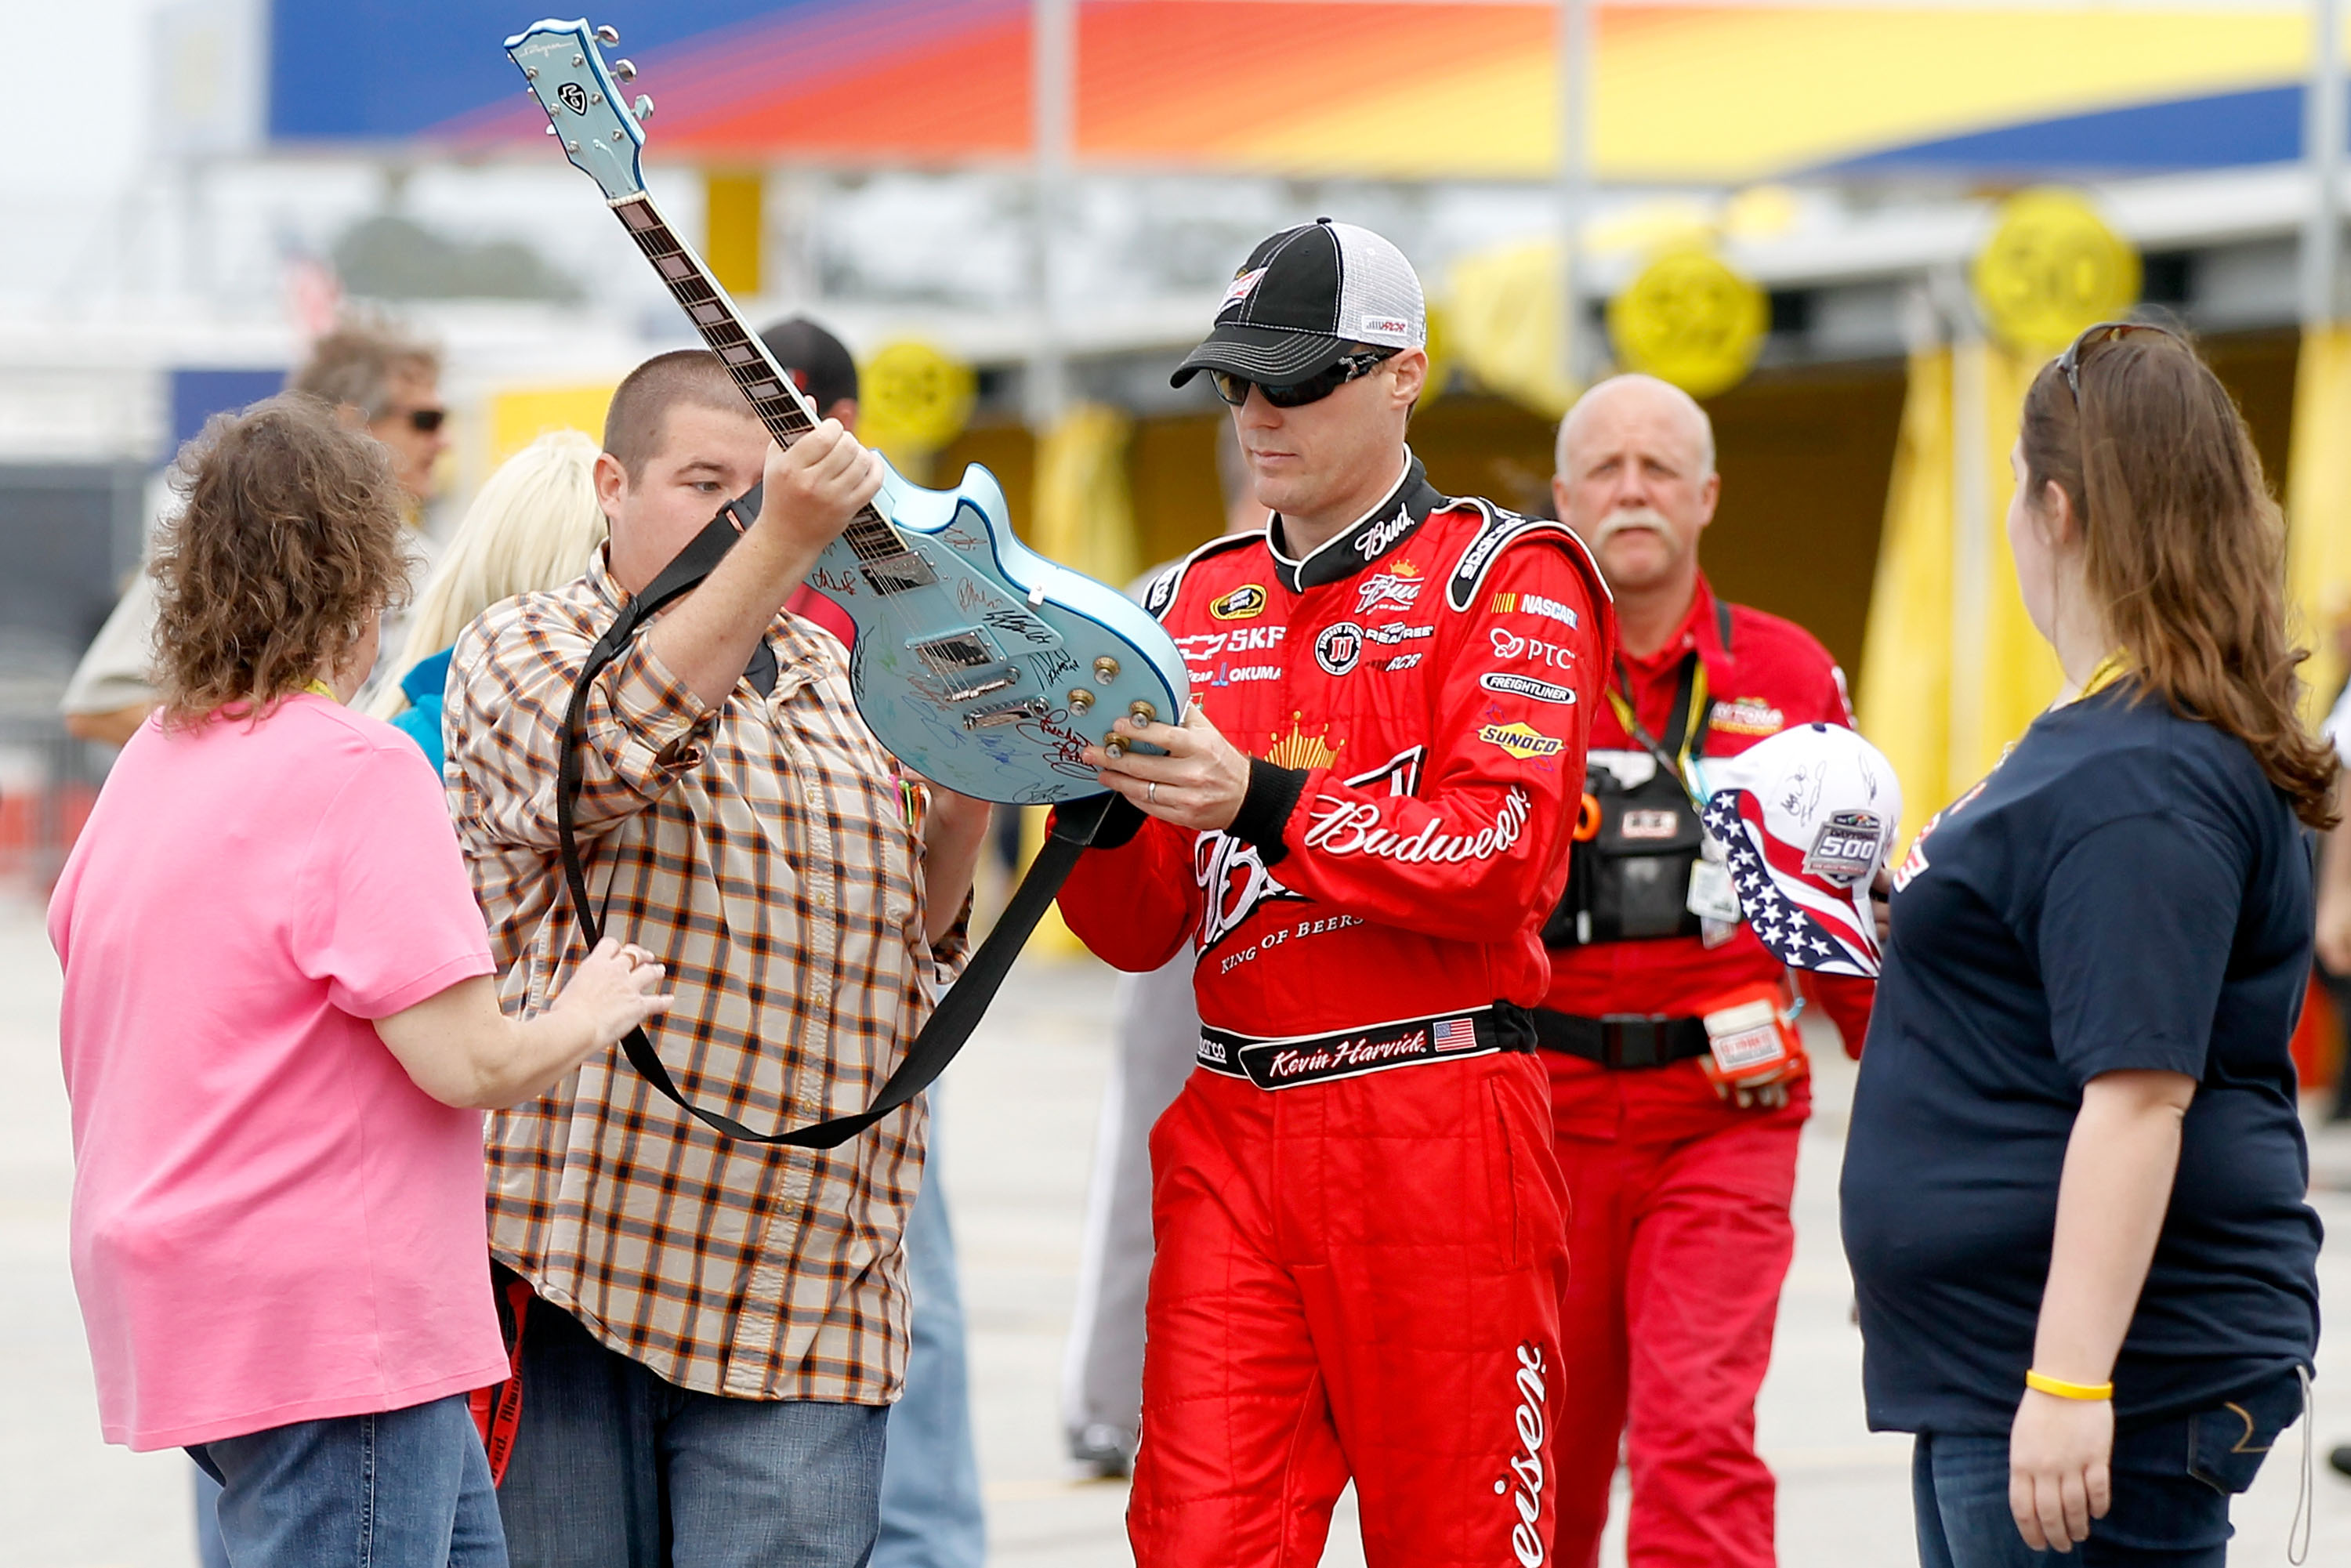 DAYTONA BEACH, FL - FEBRUARY 16:  Kevin Harvick, driver of the #29 Budweiser Chevrolet, signs a guitar in the garage area during practice for the NASCAR Sprint Cup Series Daytona 500 at Daytona International Speedway on February 16, 2011 in Daytona Beach,